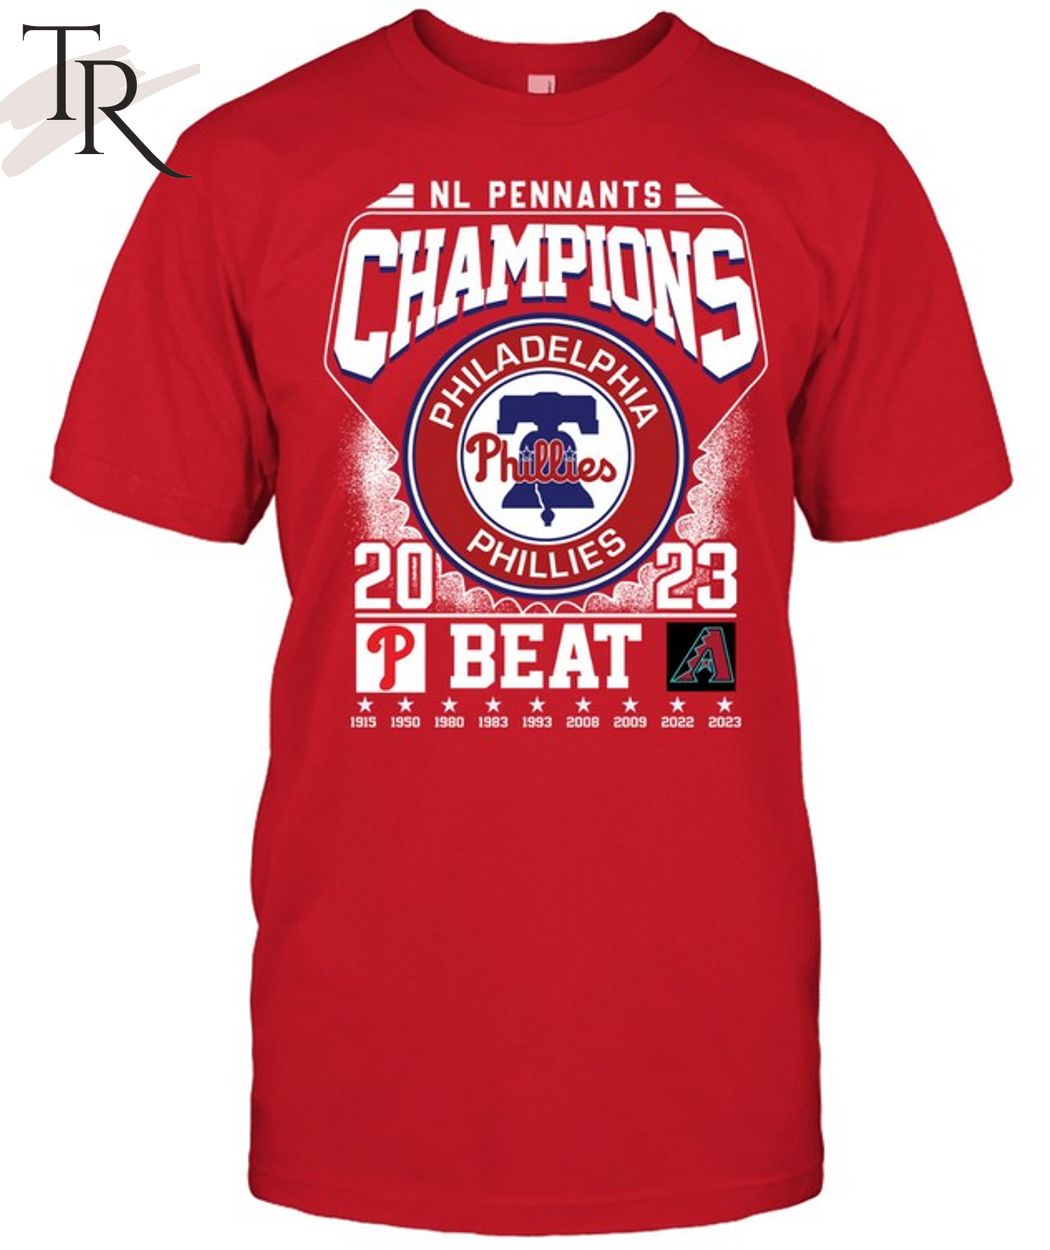 Phillies NLDS 2008 championship shirt - Gray in Large